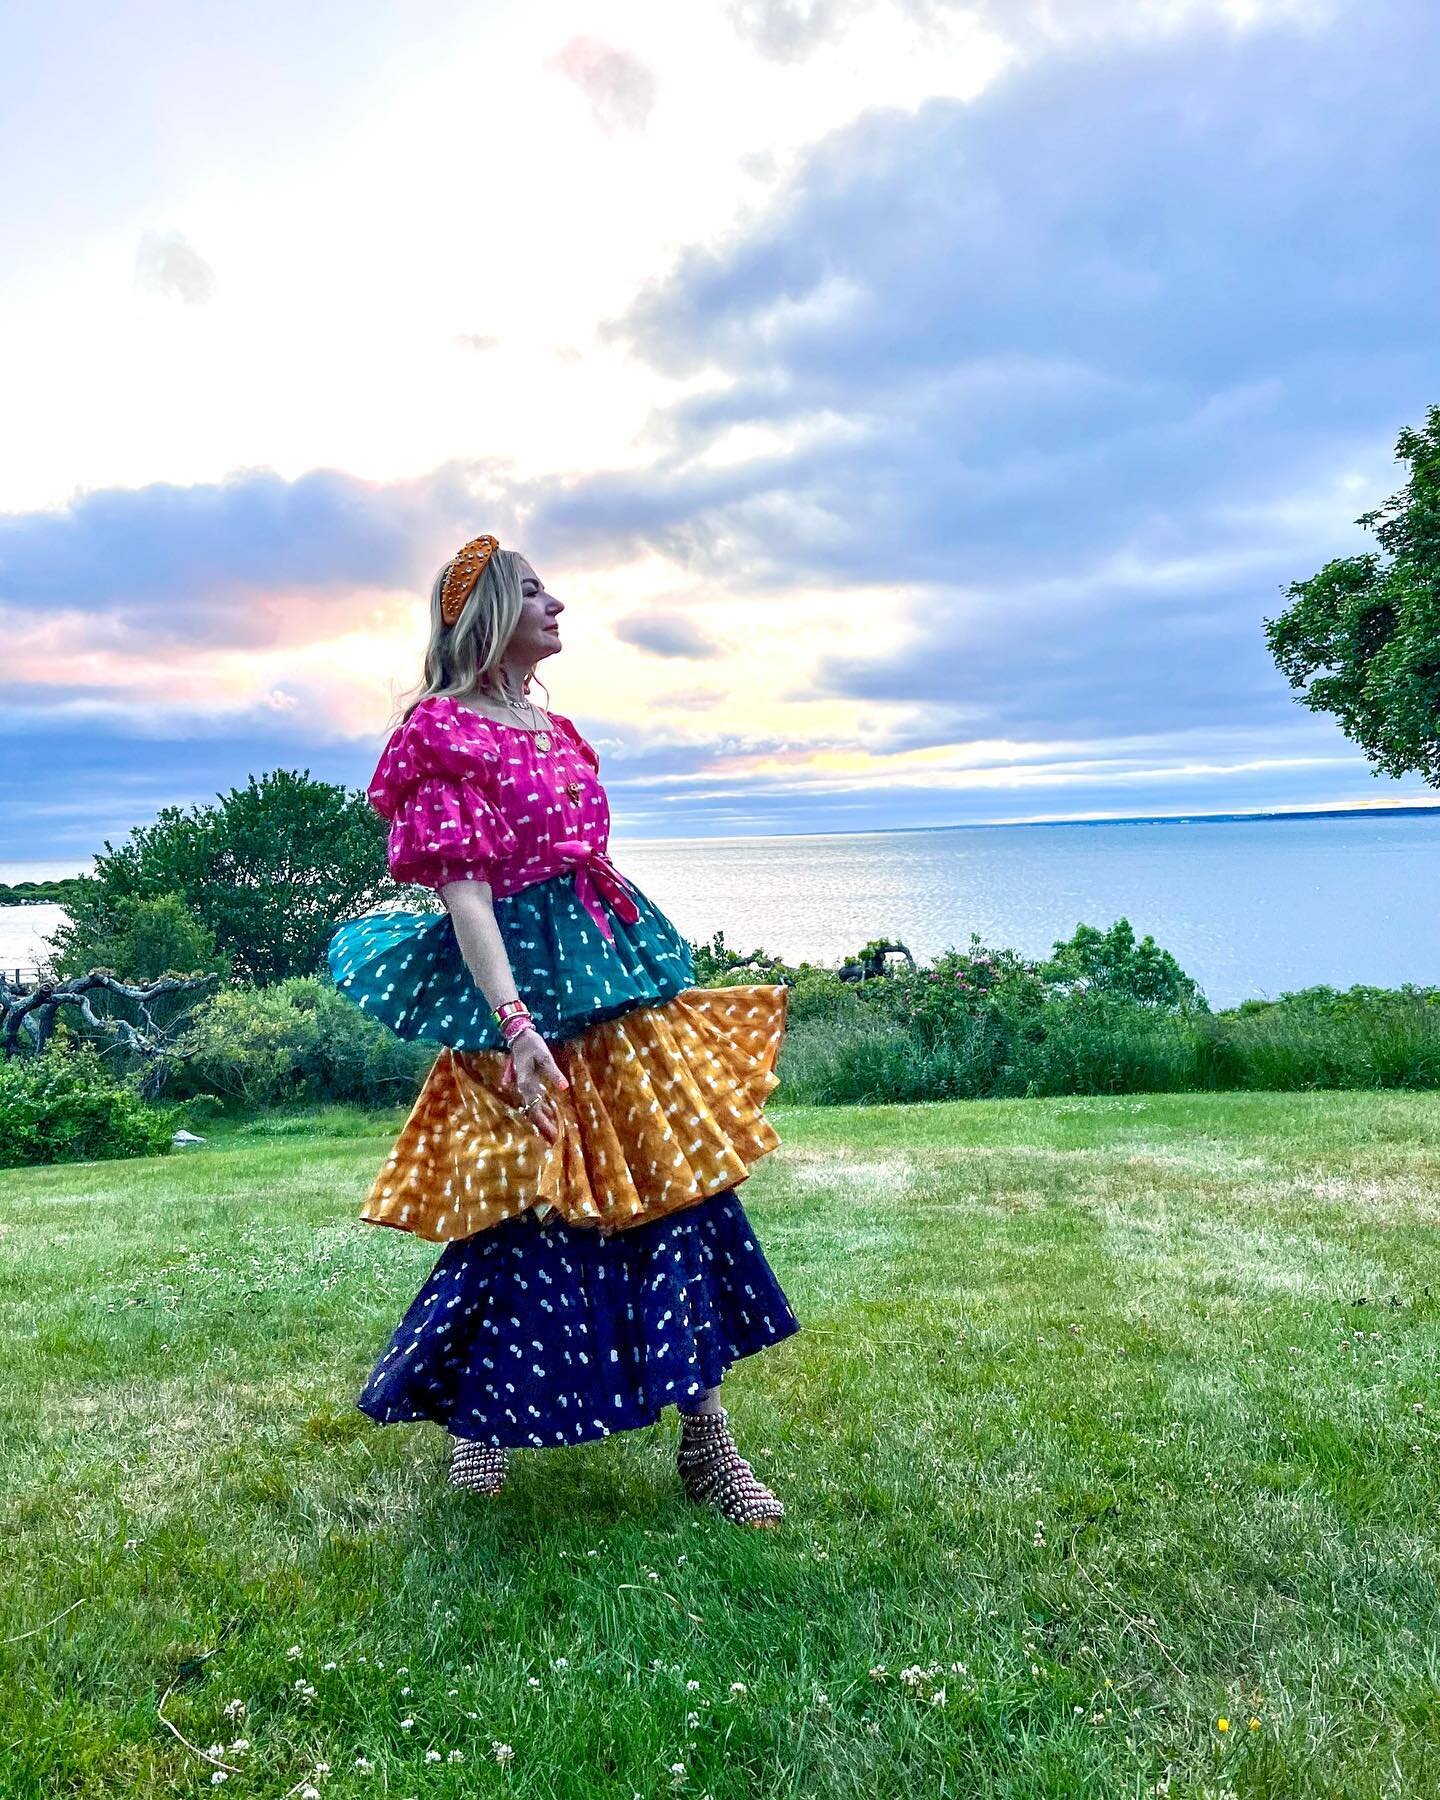 How the summer began 
☀️🩵🌈
A group of 14 extraordinary women from near &amp; far gathered together in this magical place, Fishers Island. We were brought together by the unicorn that is  @sophiamanassei 🦄
☀️🩵🌈
She led us in the act of BLOSSOMING